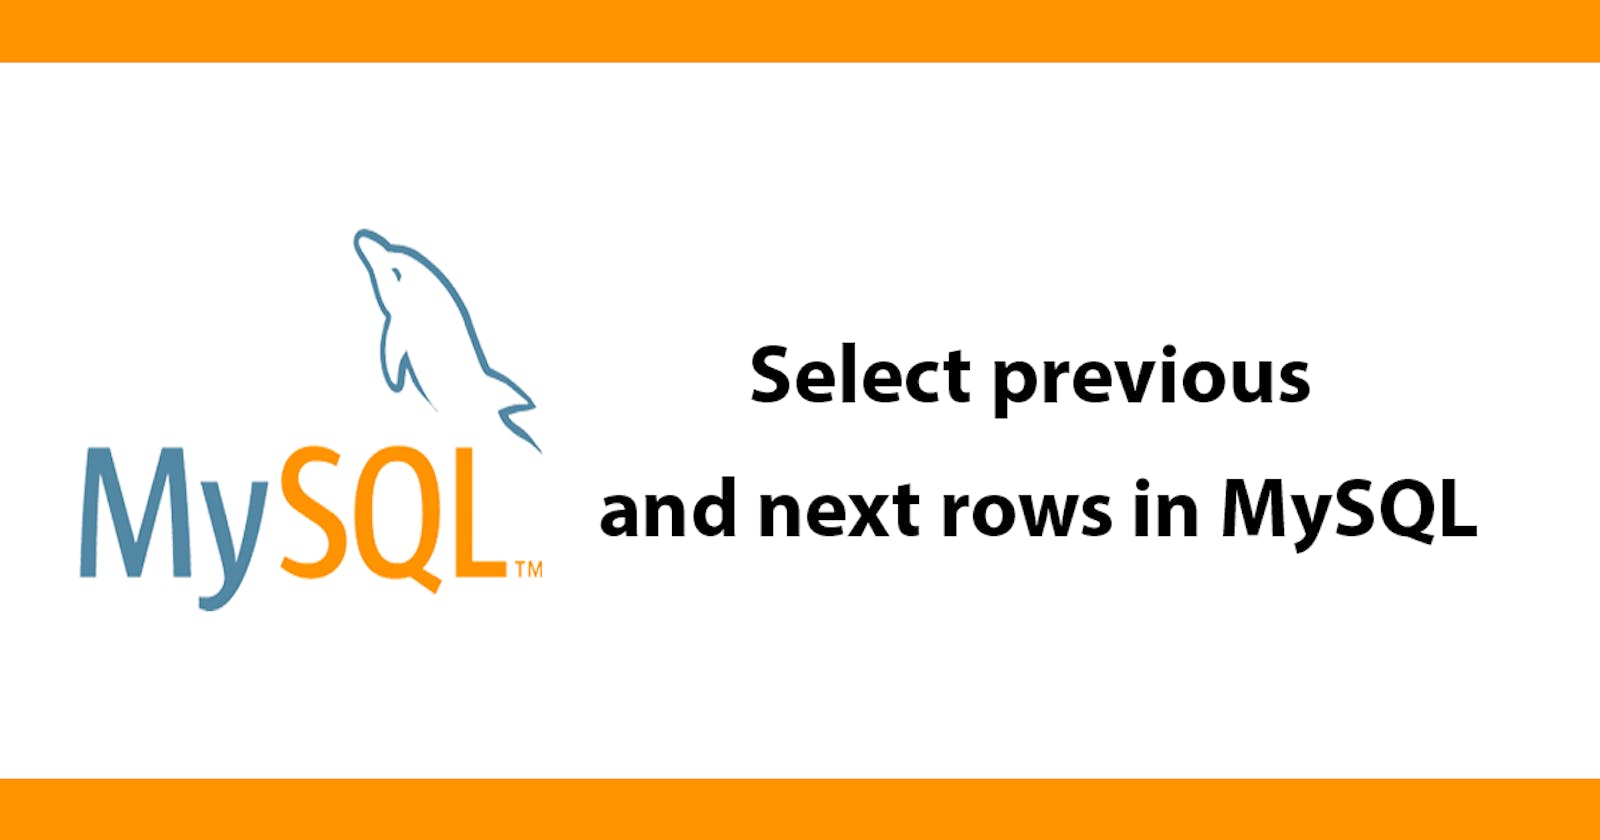 Select previous and next rows in MySQL